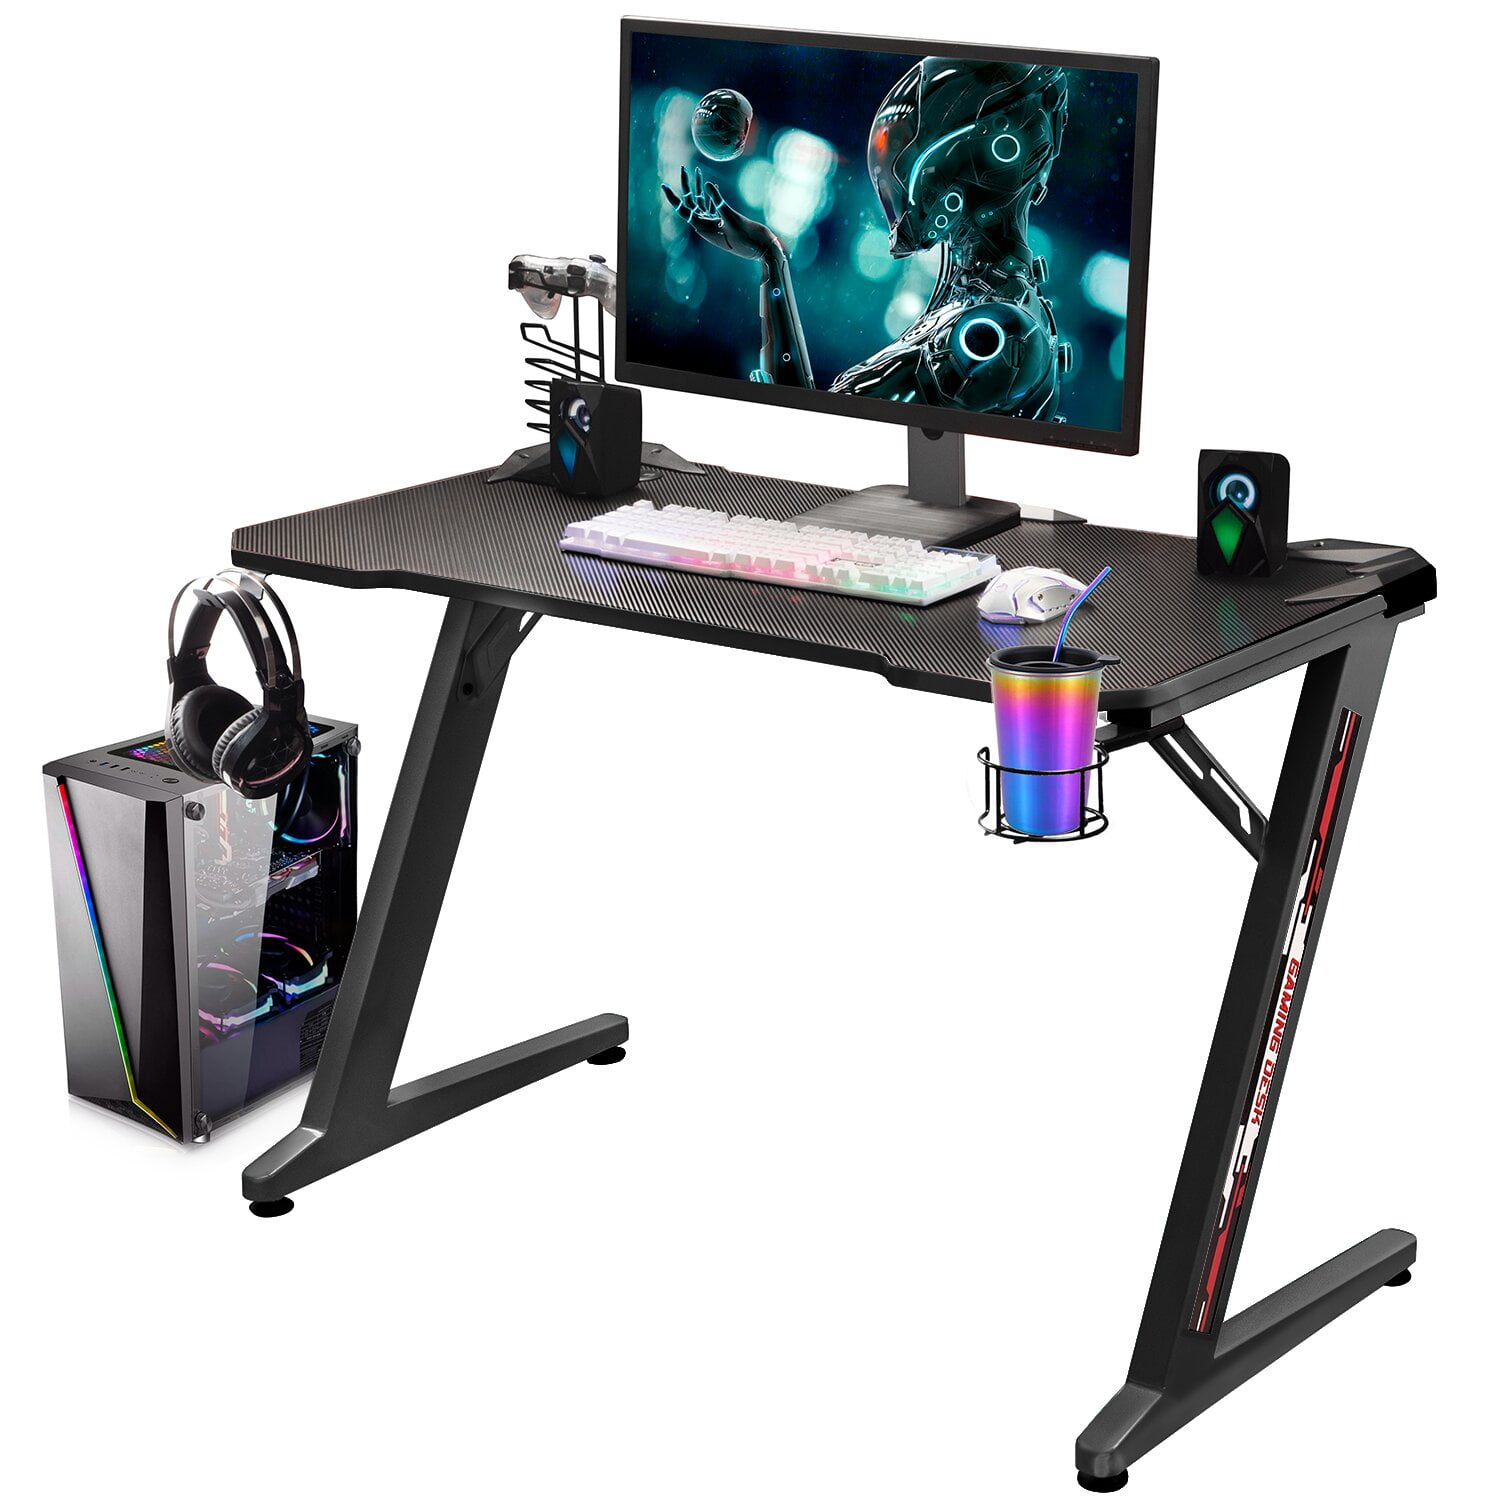 Gaming Desk, Overall Product Weight: 48.7 lb., Cable Management: Yes 